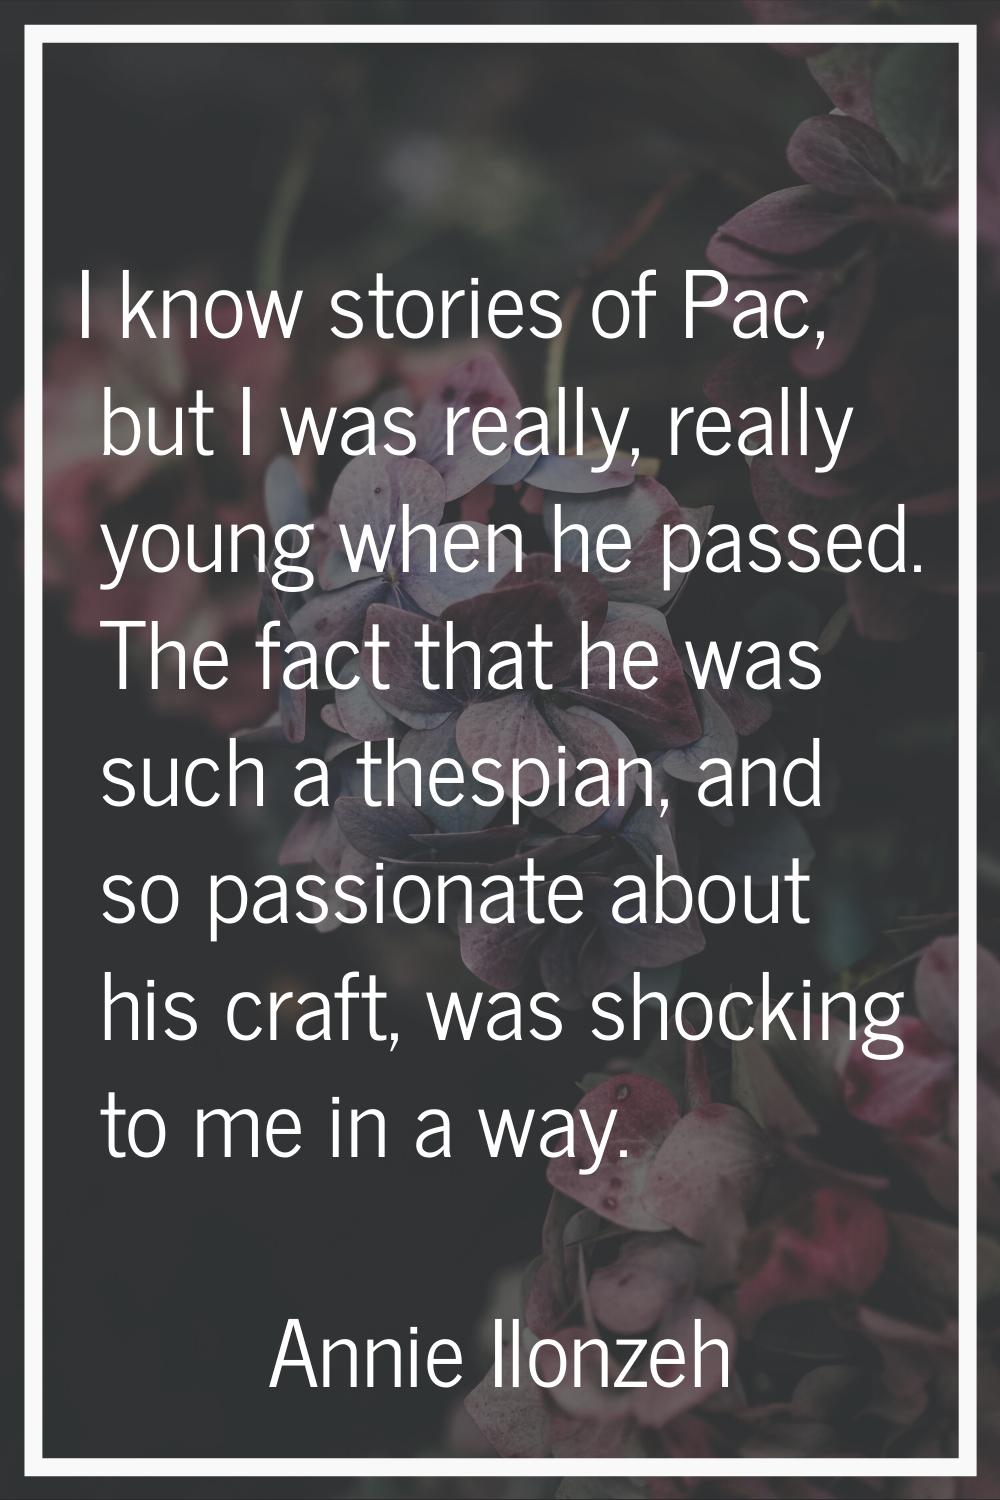 I know stories of Pac, but I was really, really young when he passed. The fact that he was such a t